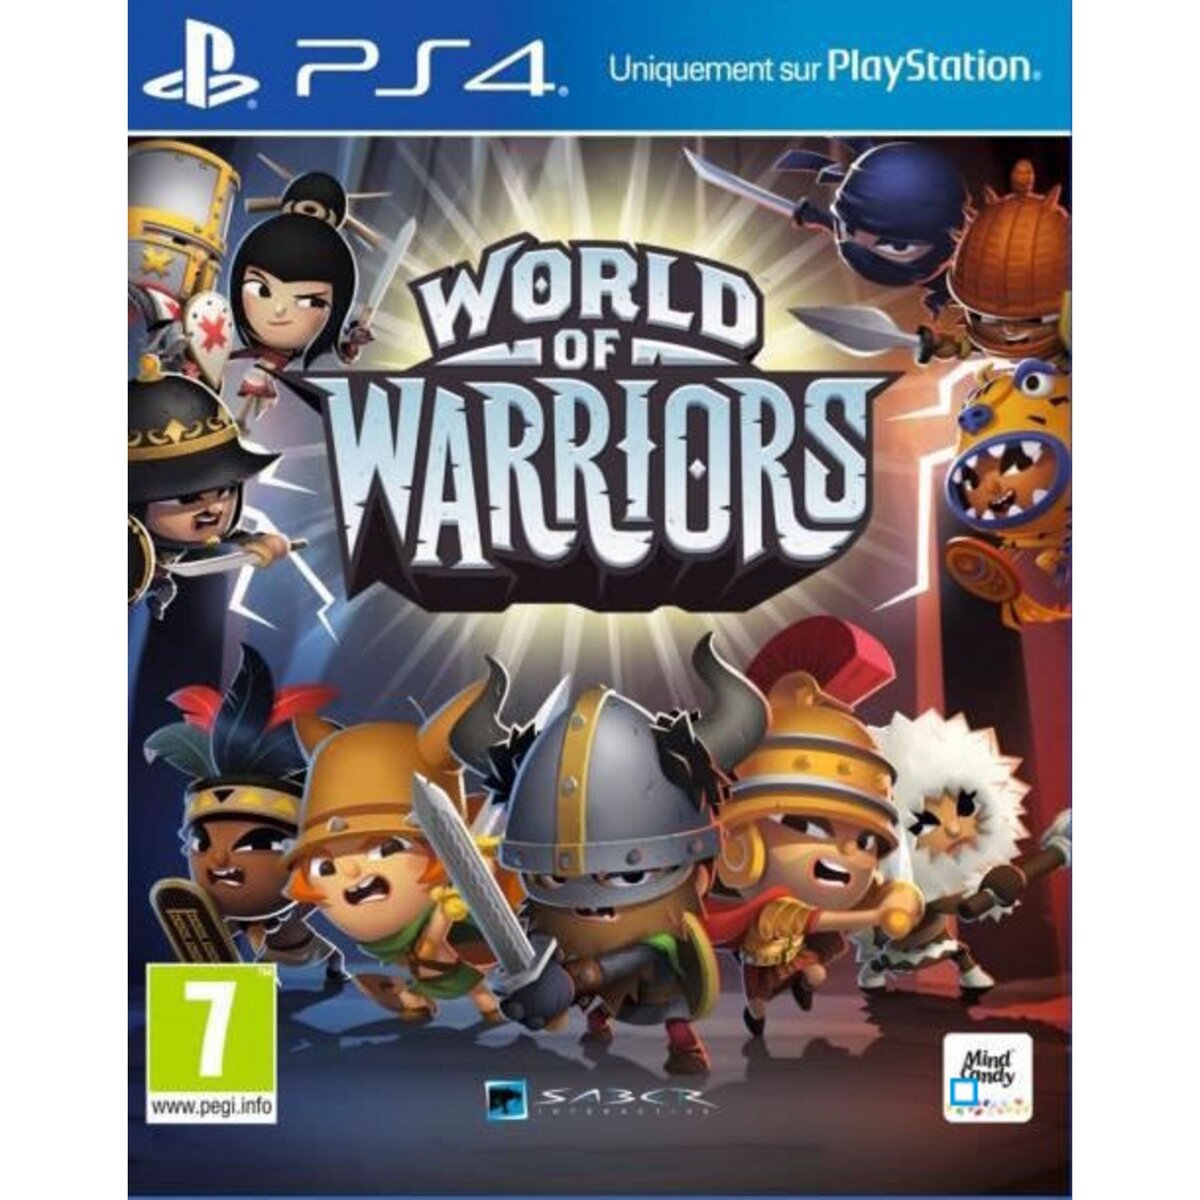 World of Warriors PS4